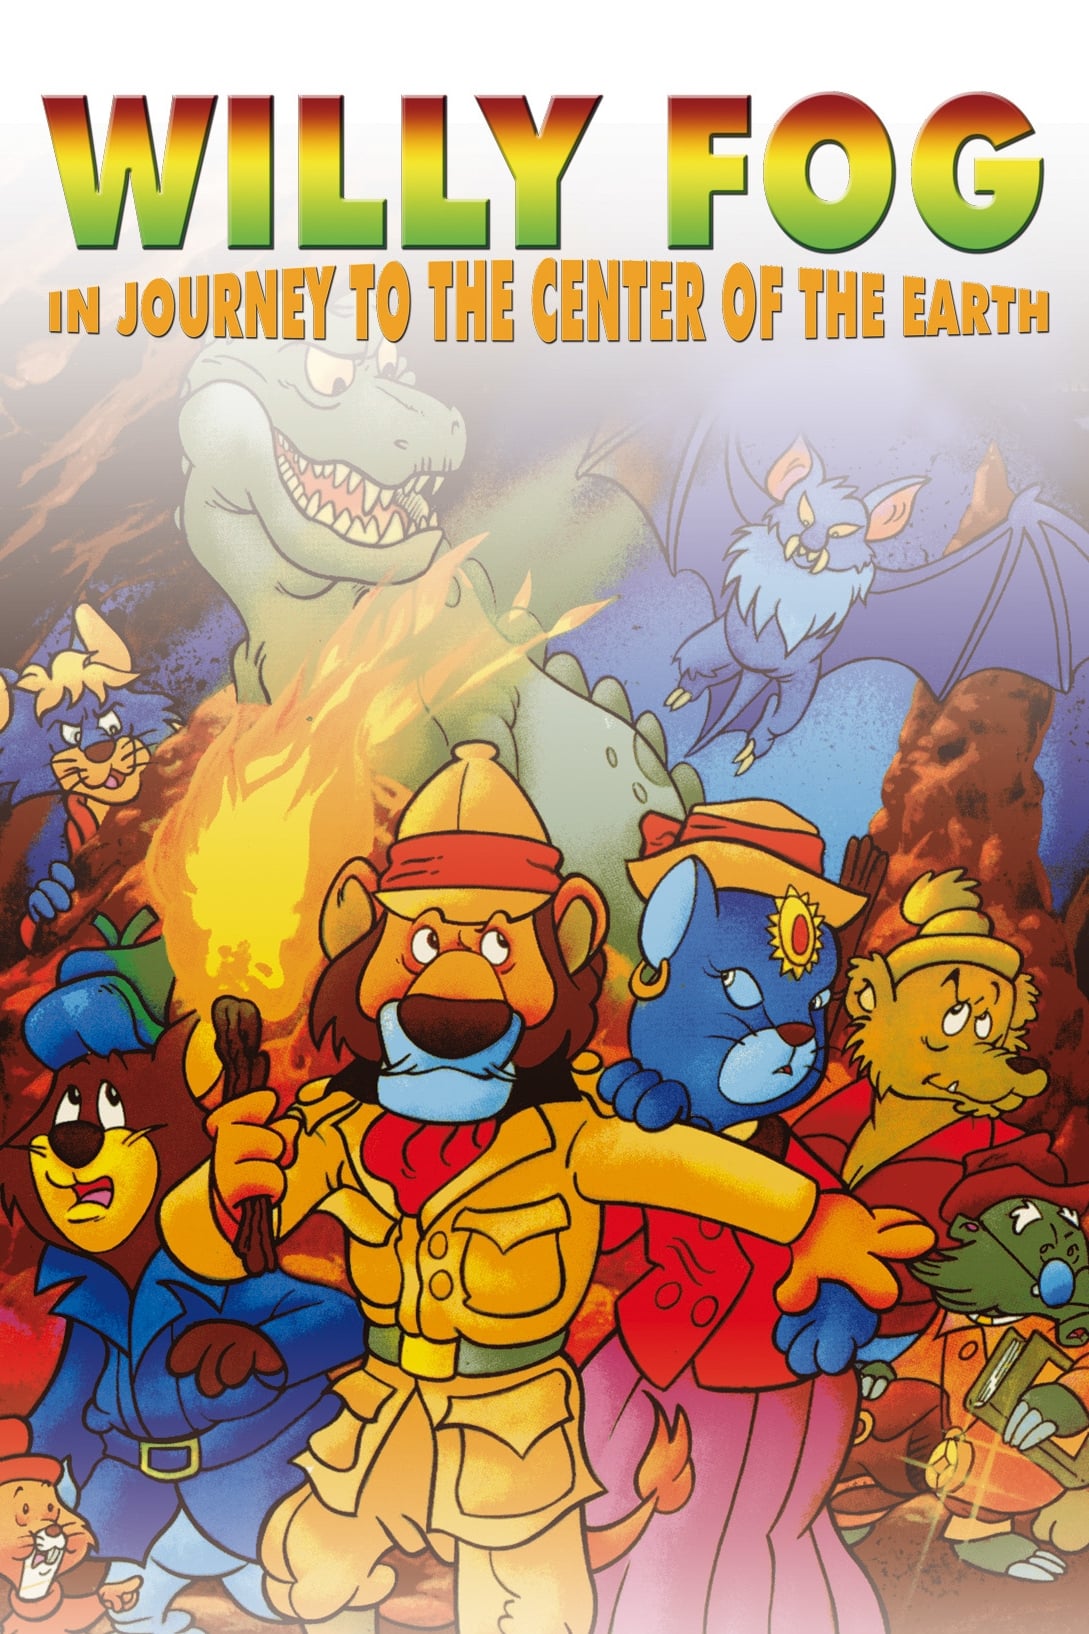 Willy Fog in Journey to the Center of the Earth